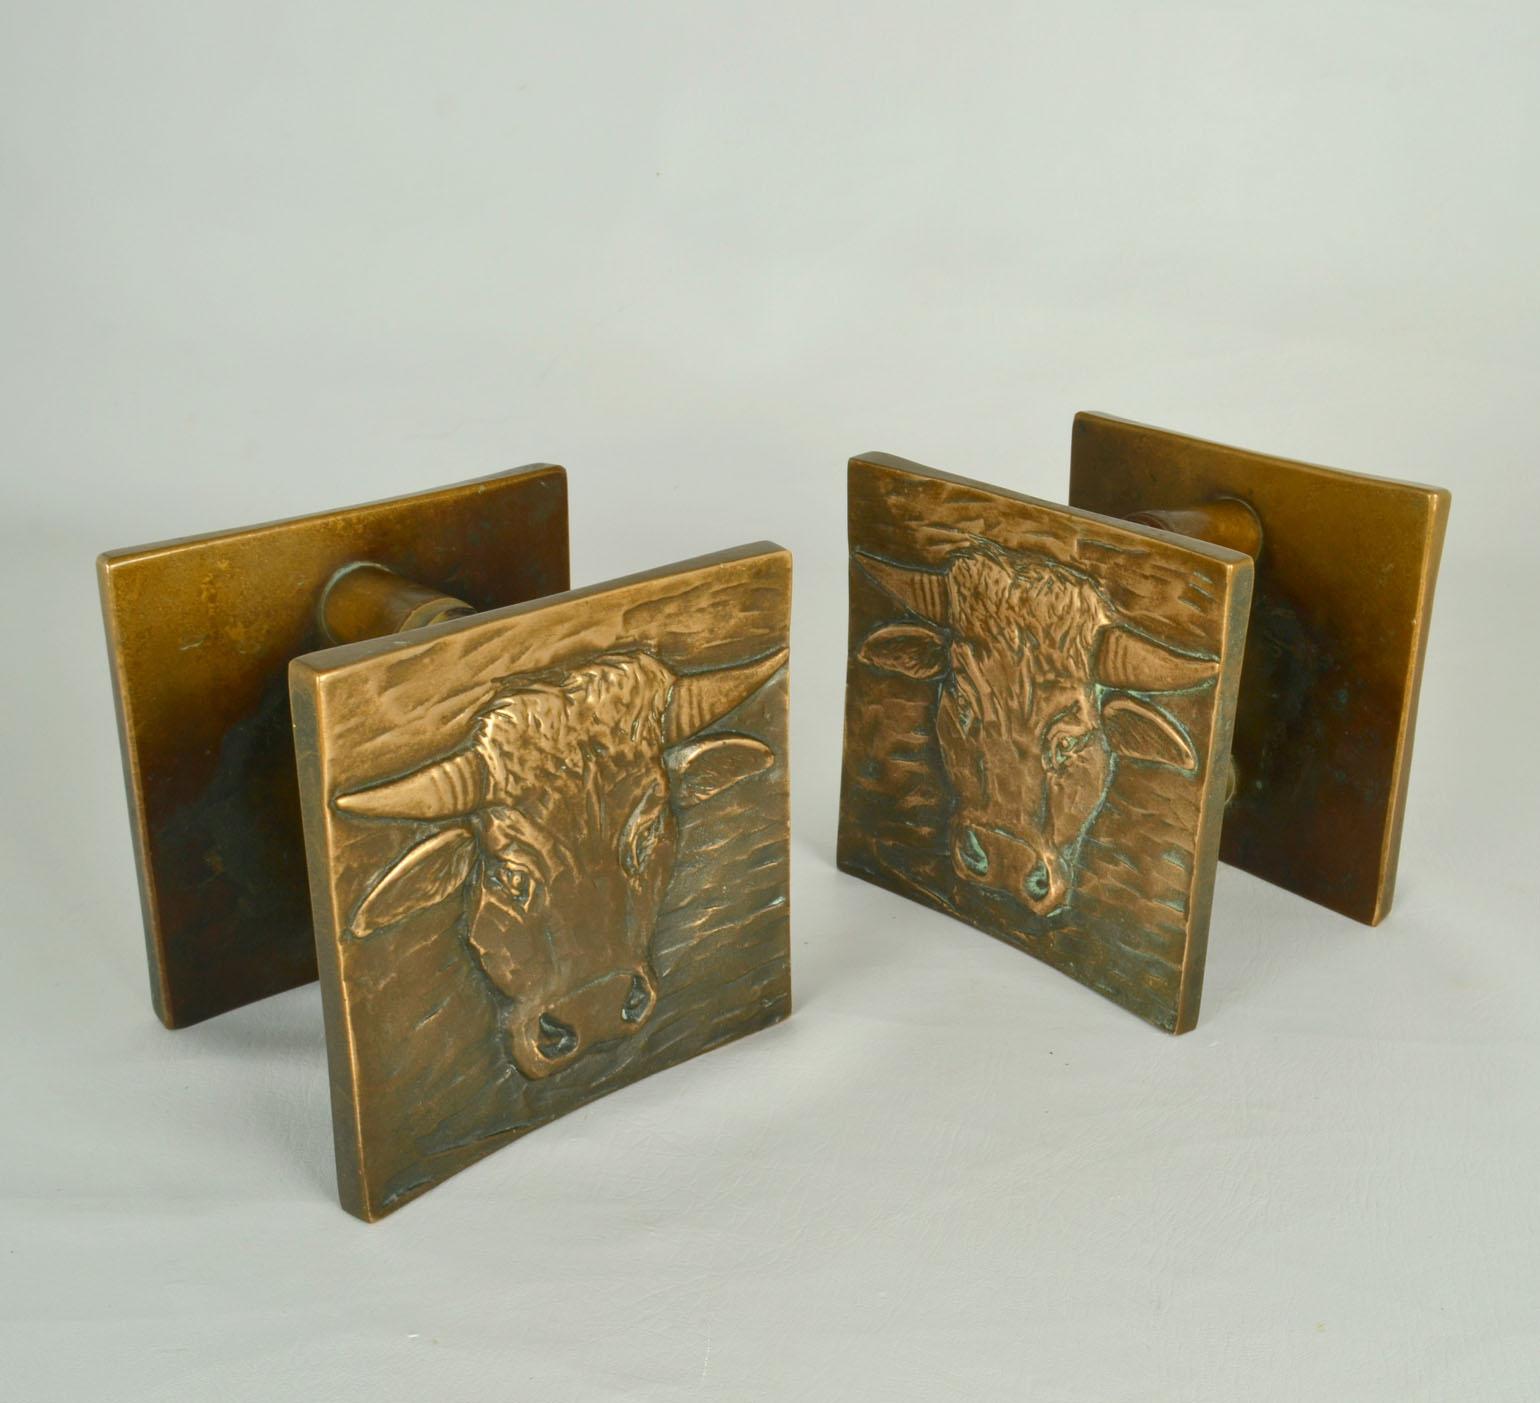 Set of two large square double bronze door handles expressing bulls, European 1970's. Their reliefs have the original patina of age. 
These identical handles can be applied inside or outside on a pair of double doors next to each other, on a single